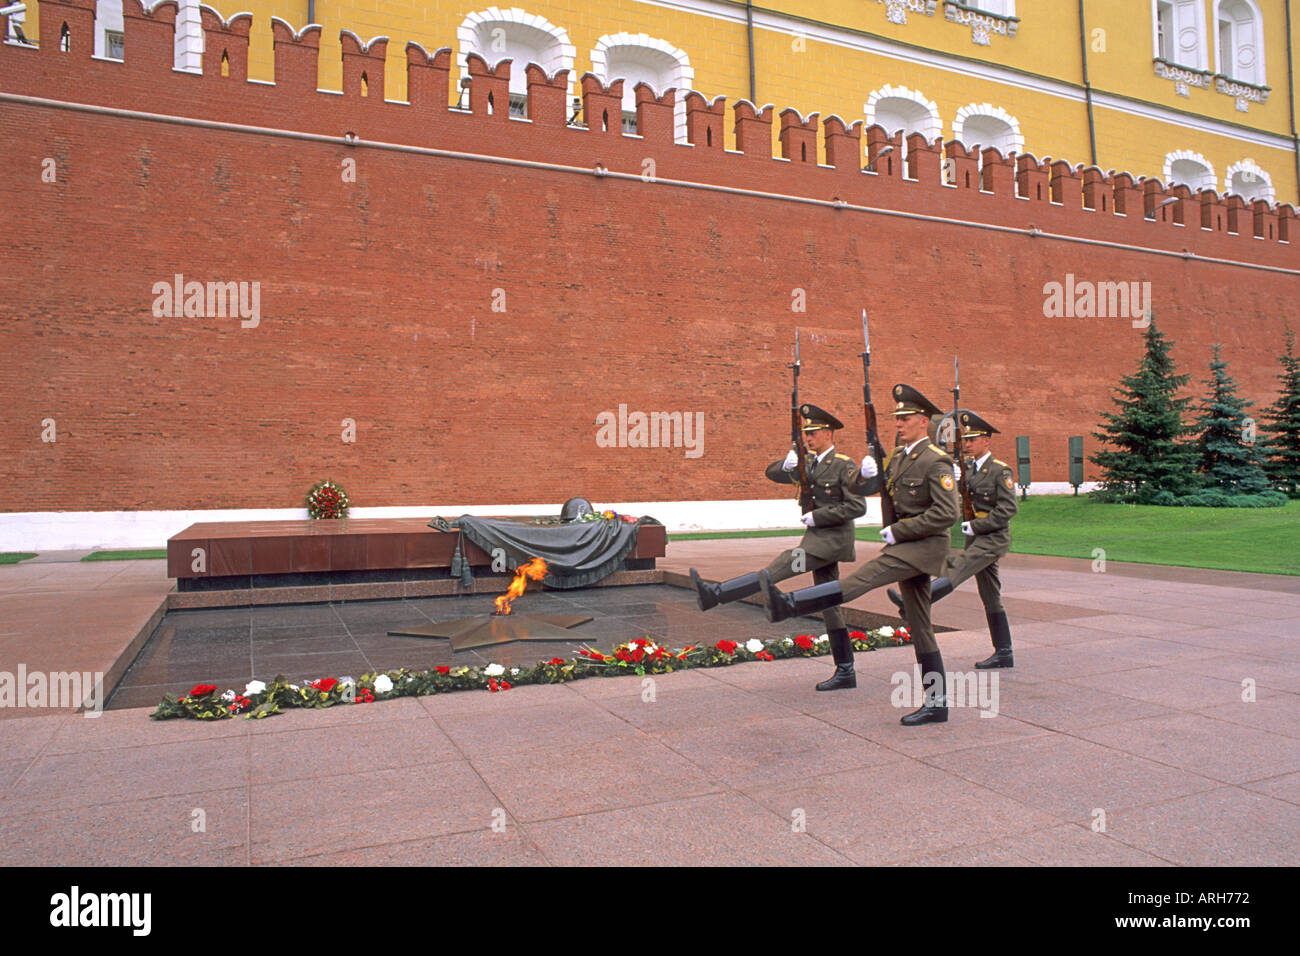 Famous Kremlin Wall Unknown Soldiers Flame Alexander Garden at Red Square in Moscow Russia Stock Photo